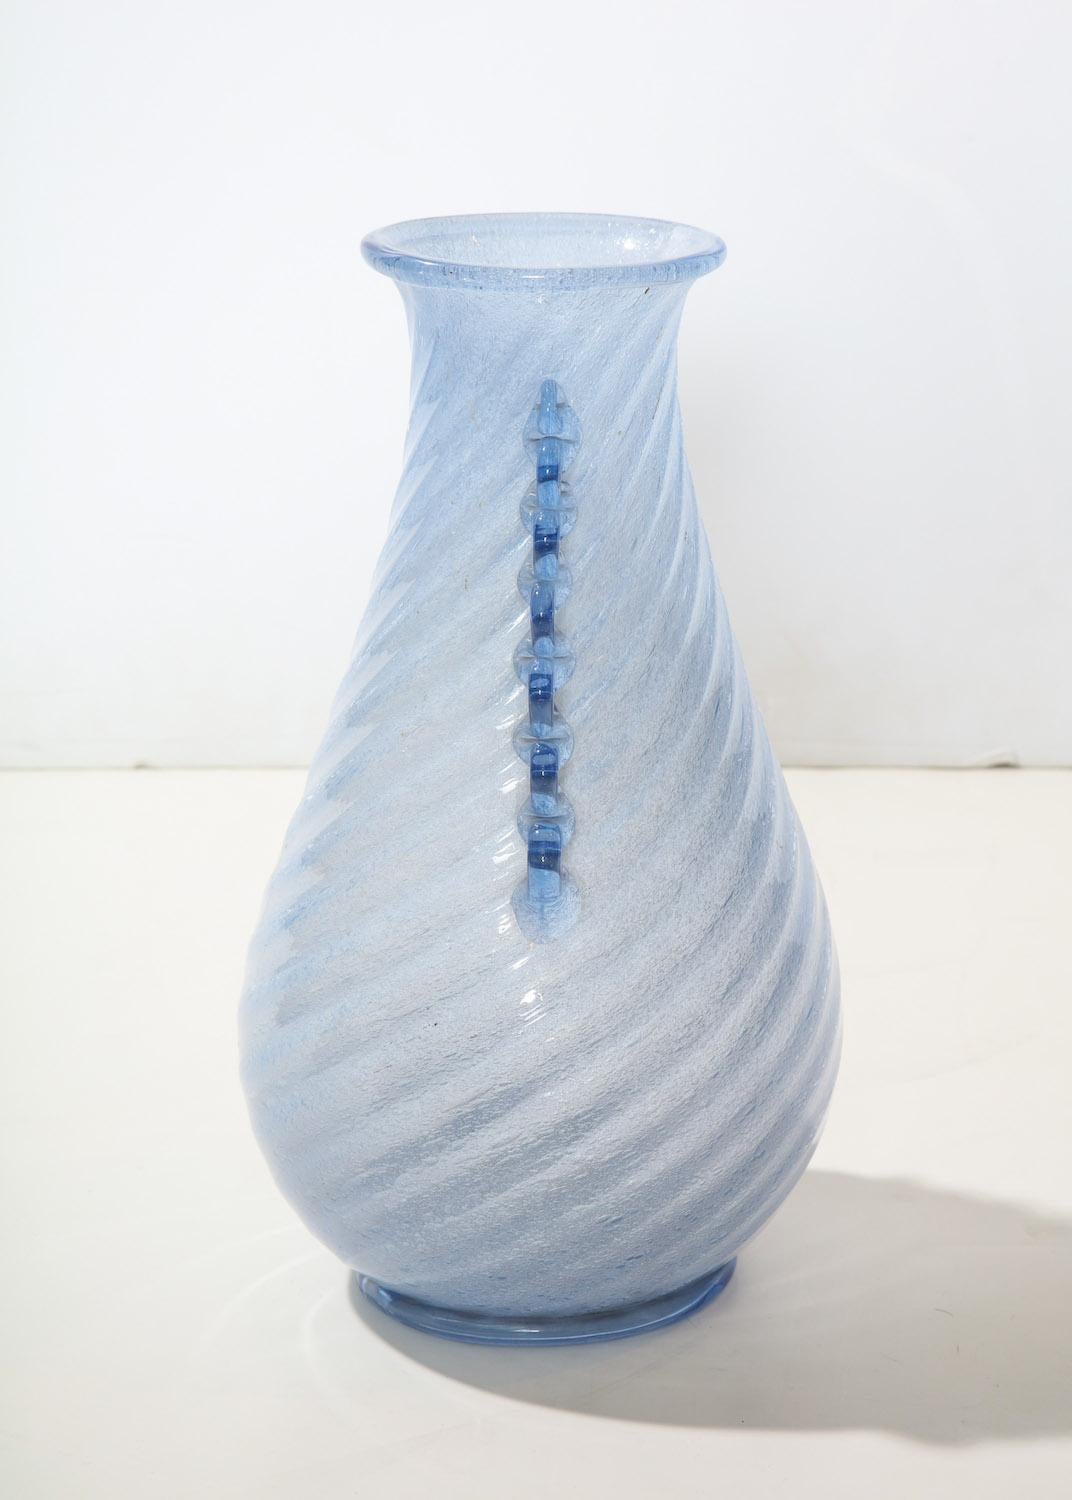 Model #884, produced by Aureliano Toso, on the island of Murano. This beautiful vase designed by Dino Martens in pale lavender glass with swirled ribbing and applied side decorations and foot.